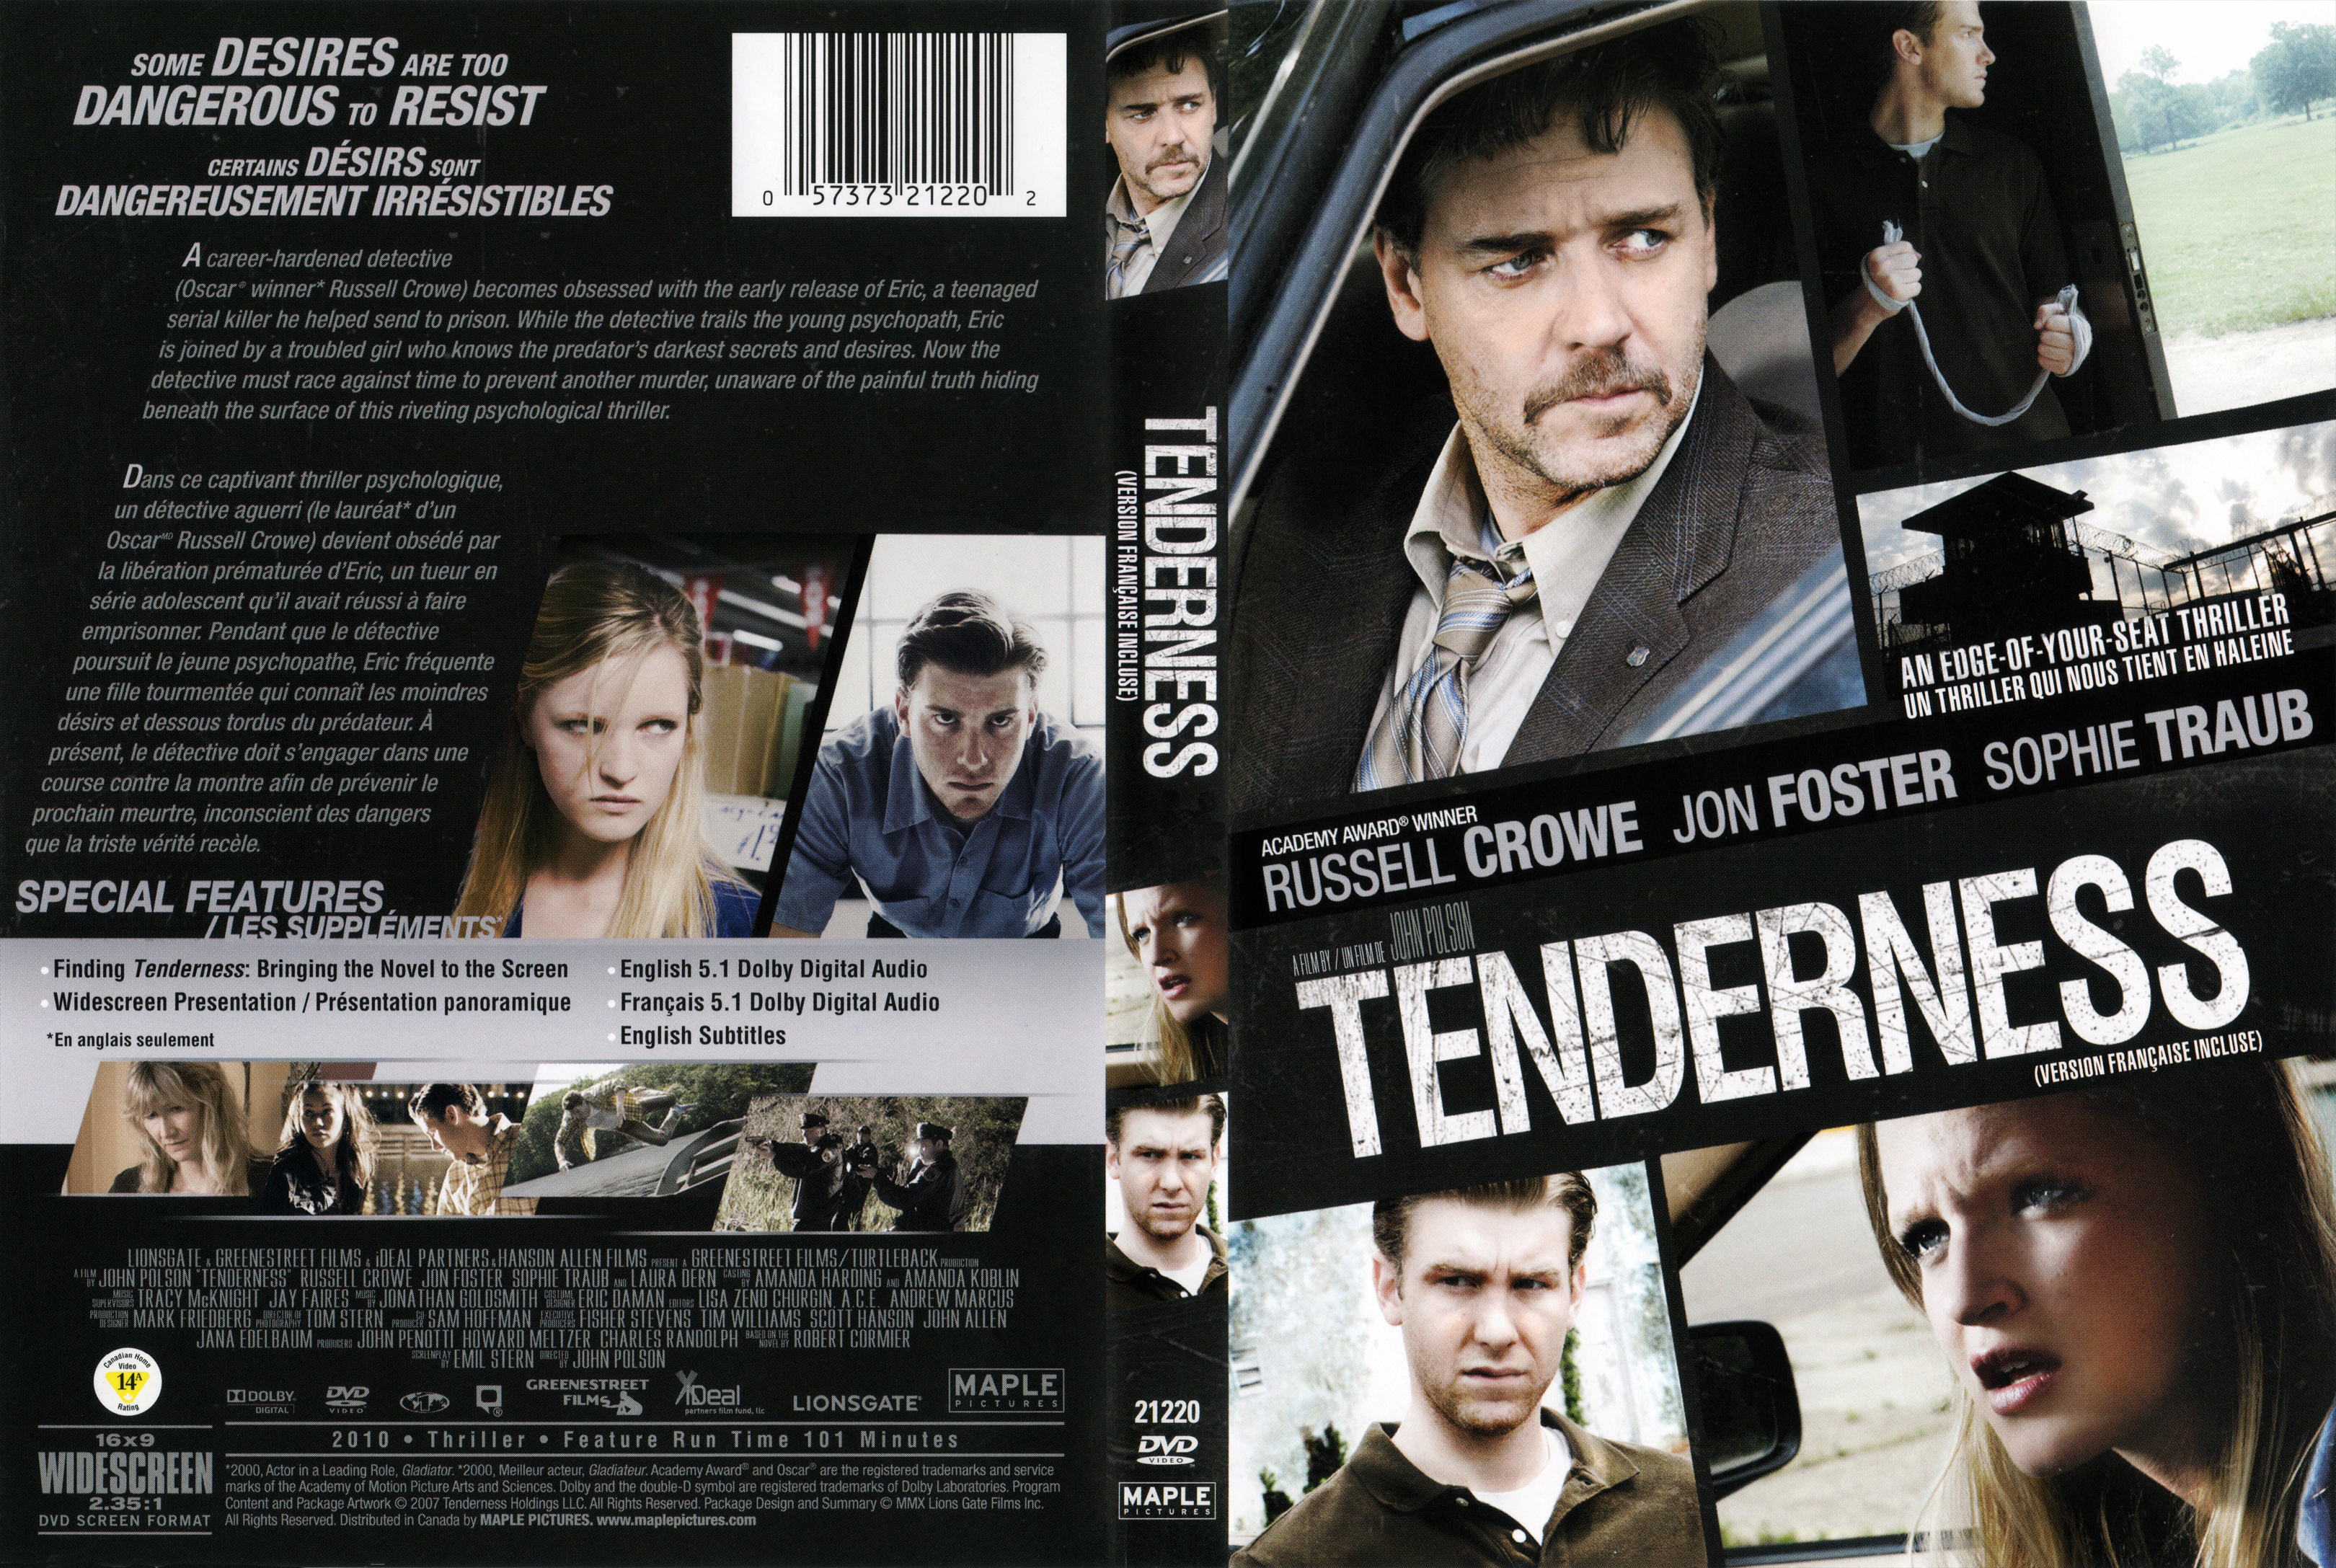 Jaquette DVD Tenderness (Canadienne)